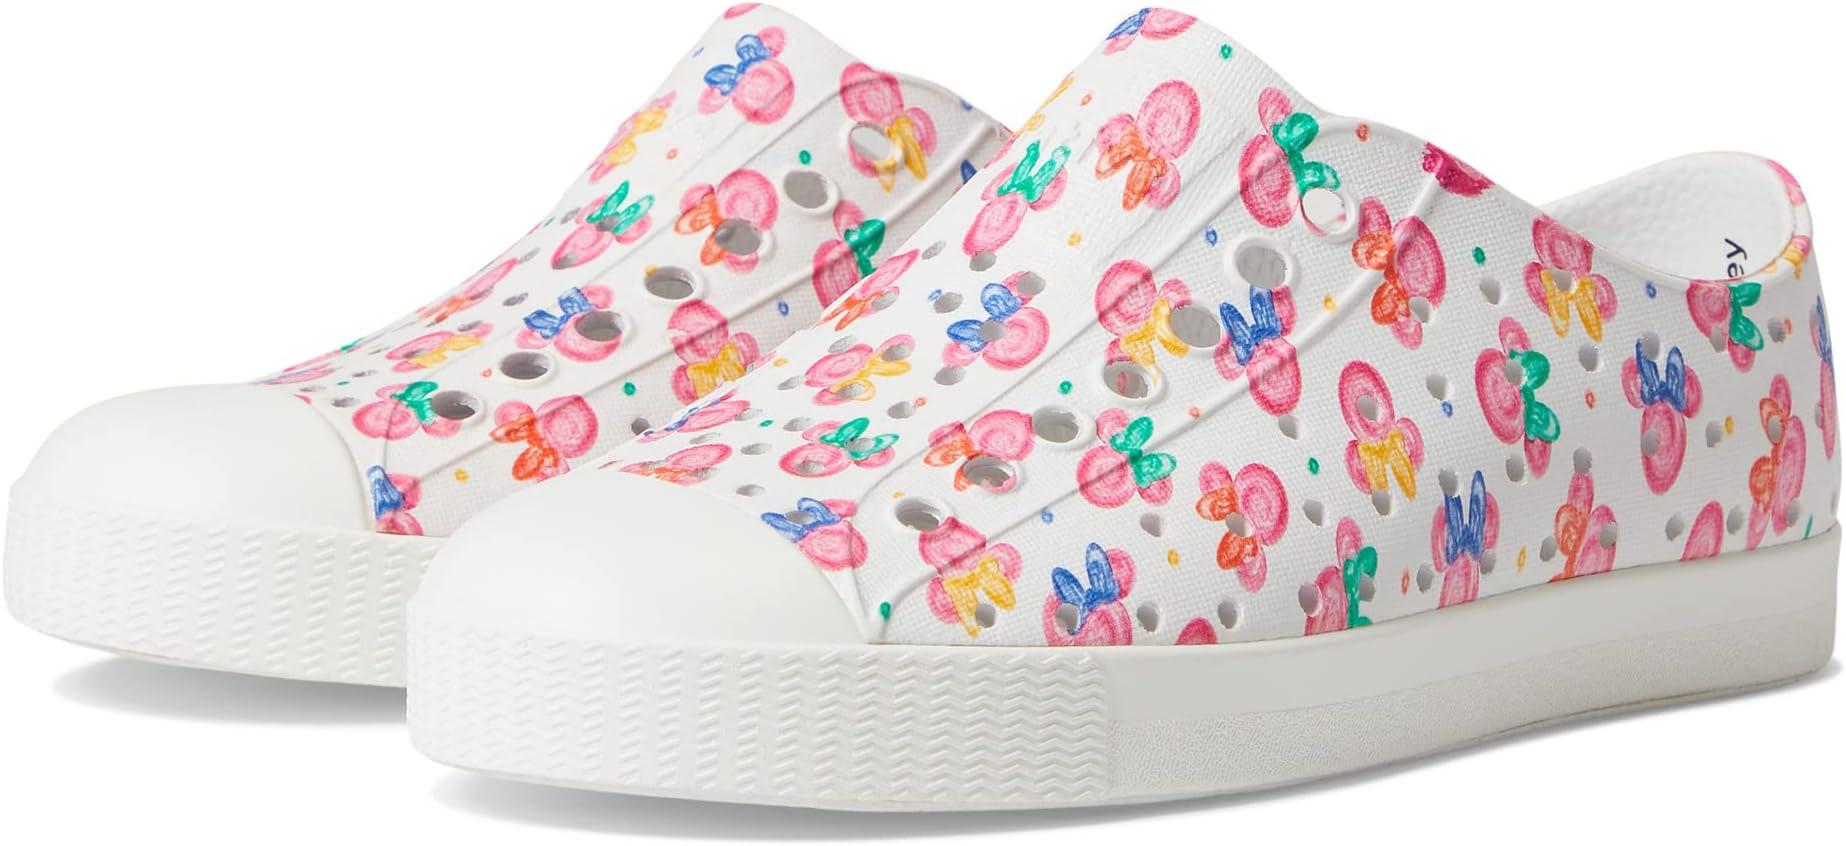 Кроссовки Jefferson Disney Print Native Shoes Kids, цвет Shell White/Shell White/Minnie Paint Drops All Over Print 2022 women little white shoes light soft sneakers ladies students casual walking shoes shell head sport shoes skateboard shoes